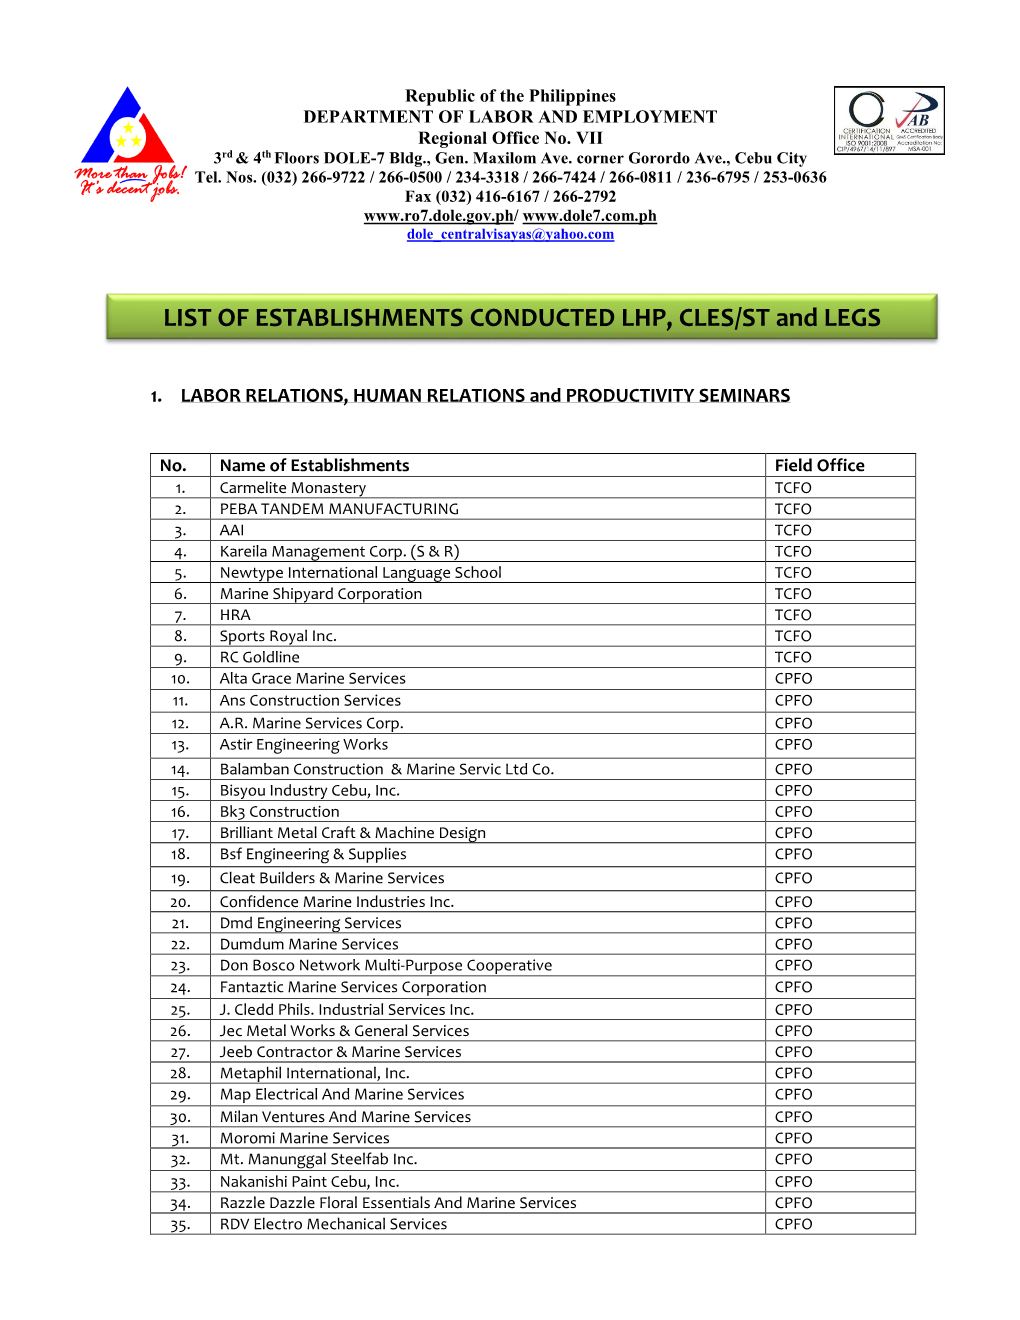 LIST of ESTABLISHMENTS CONDUCTED LHP, CLES/ST and LEGS